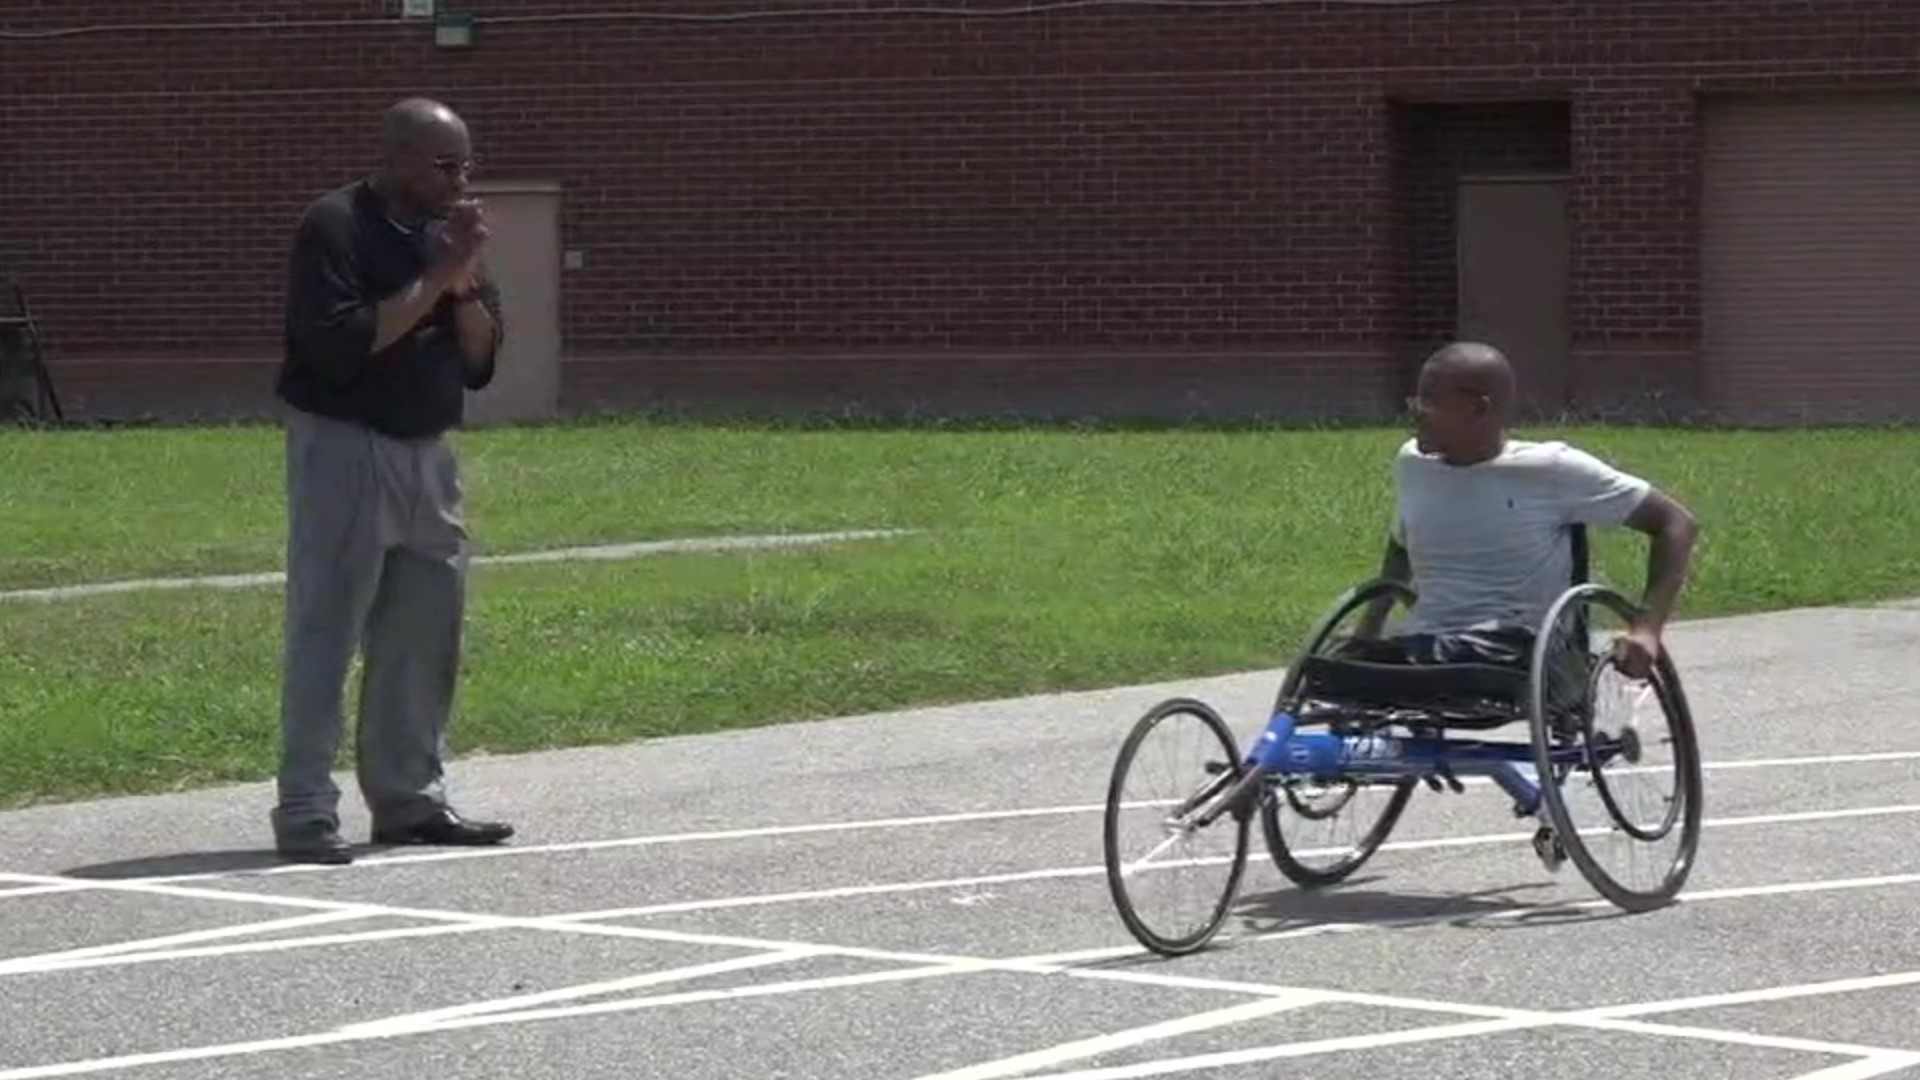 A wish come true for a 13-year-old boy. Adonis Lattimore was born without legs, but his parents say it hasn't stopped him from doing what he loves.